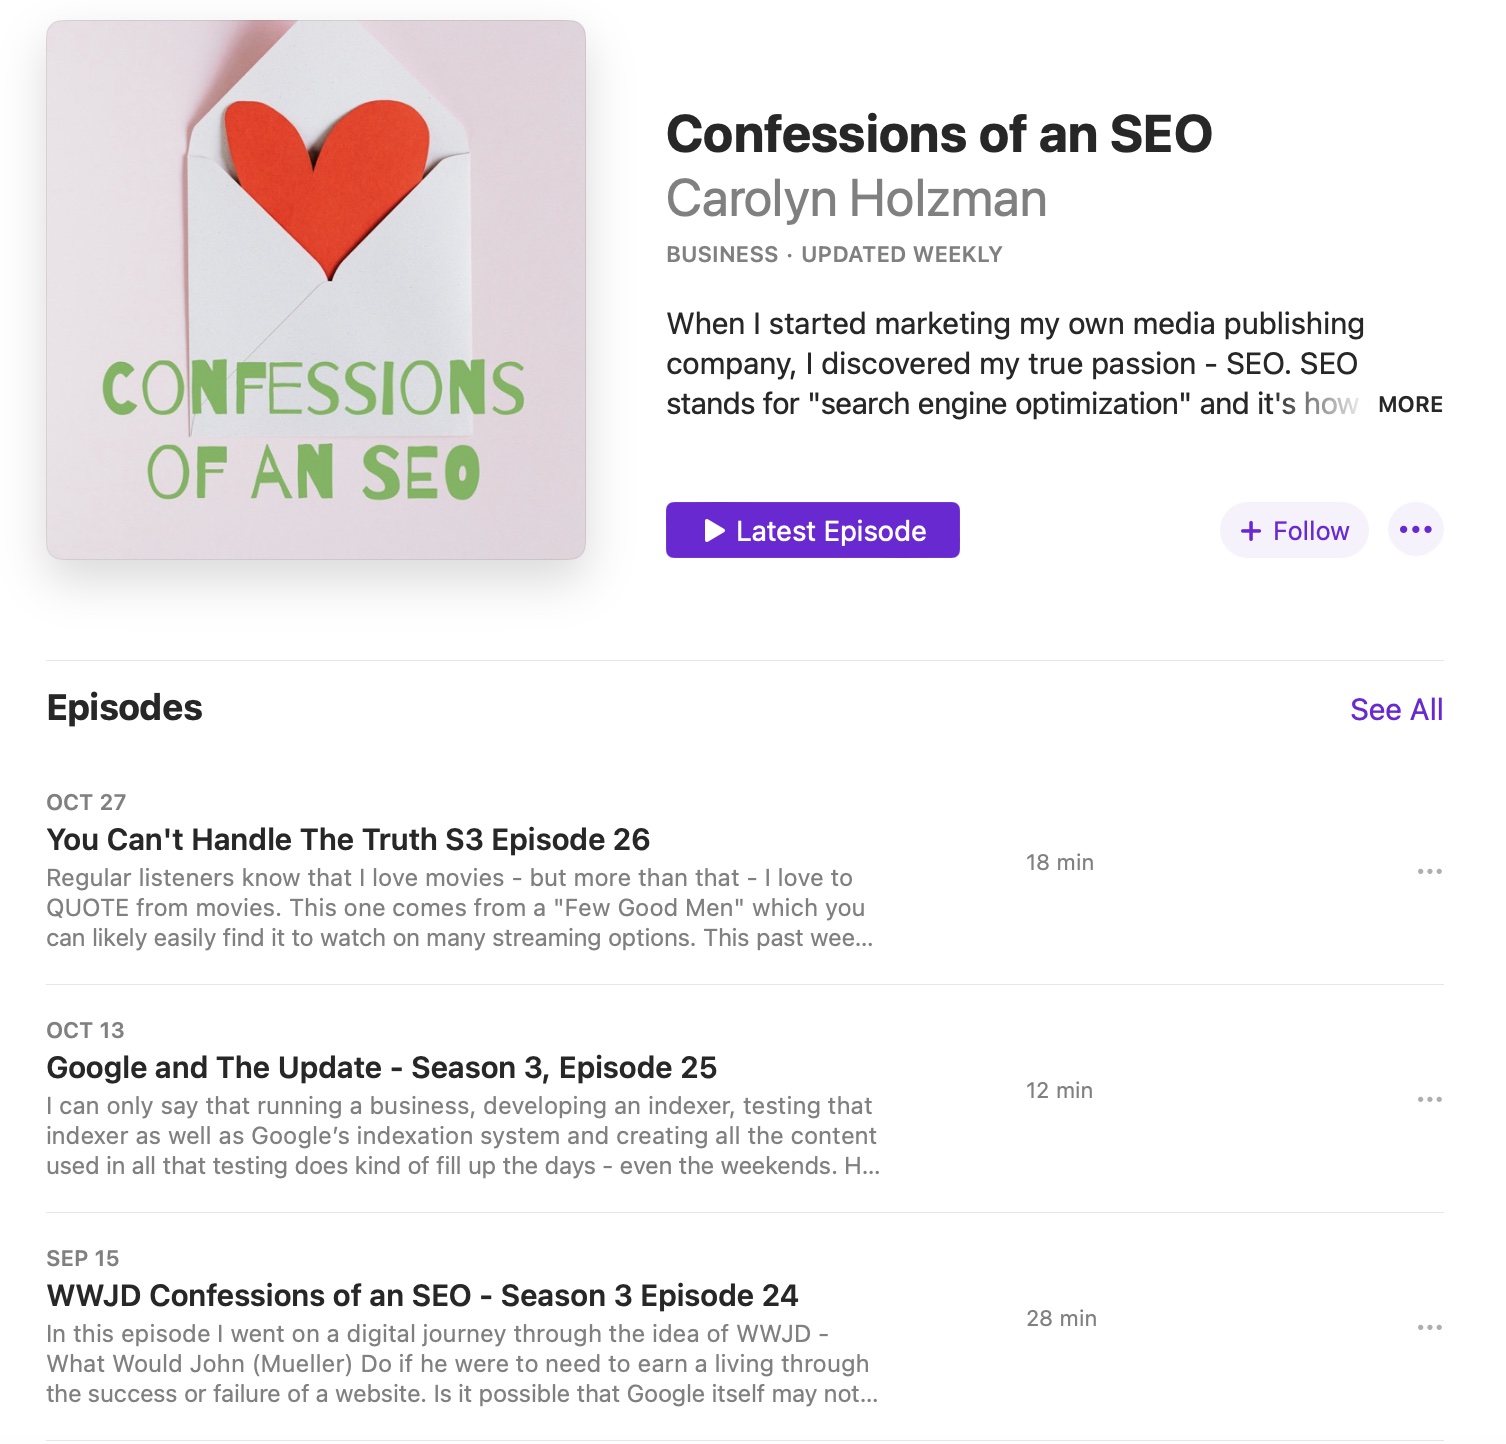 Confessions of an SEO podcast page